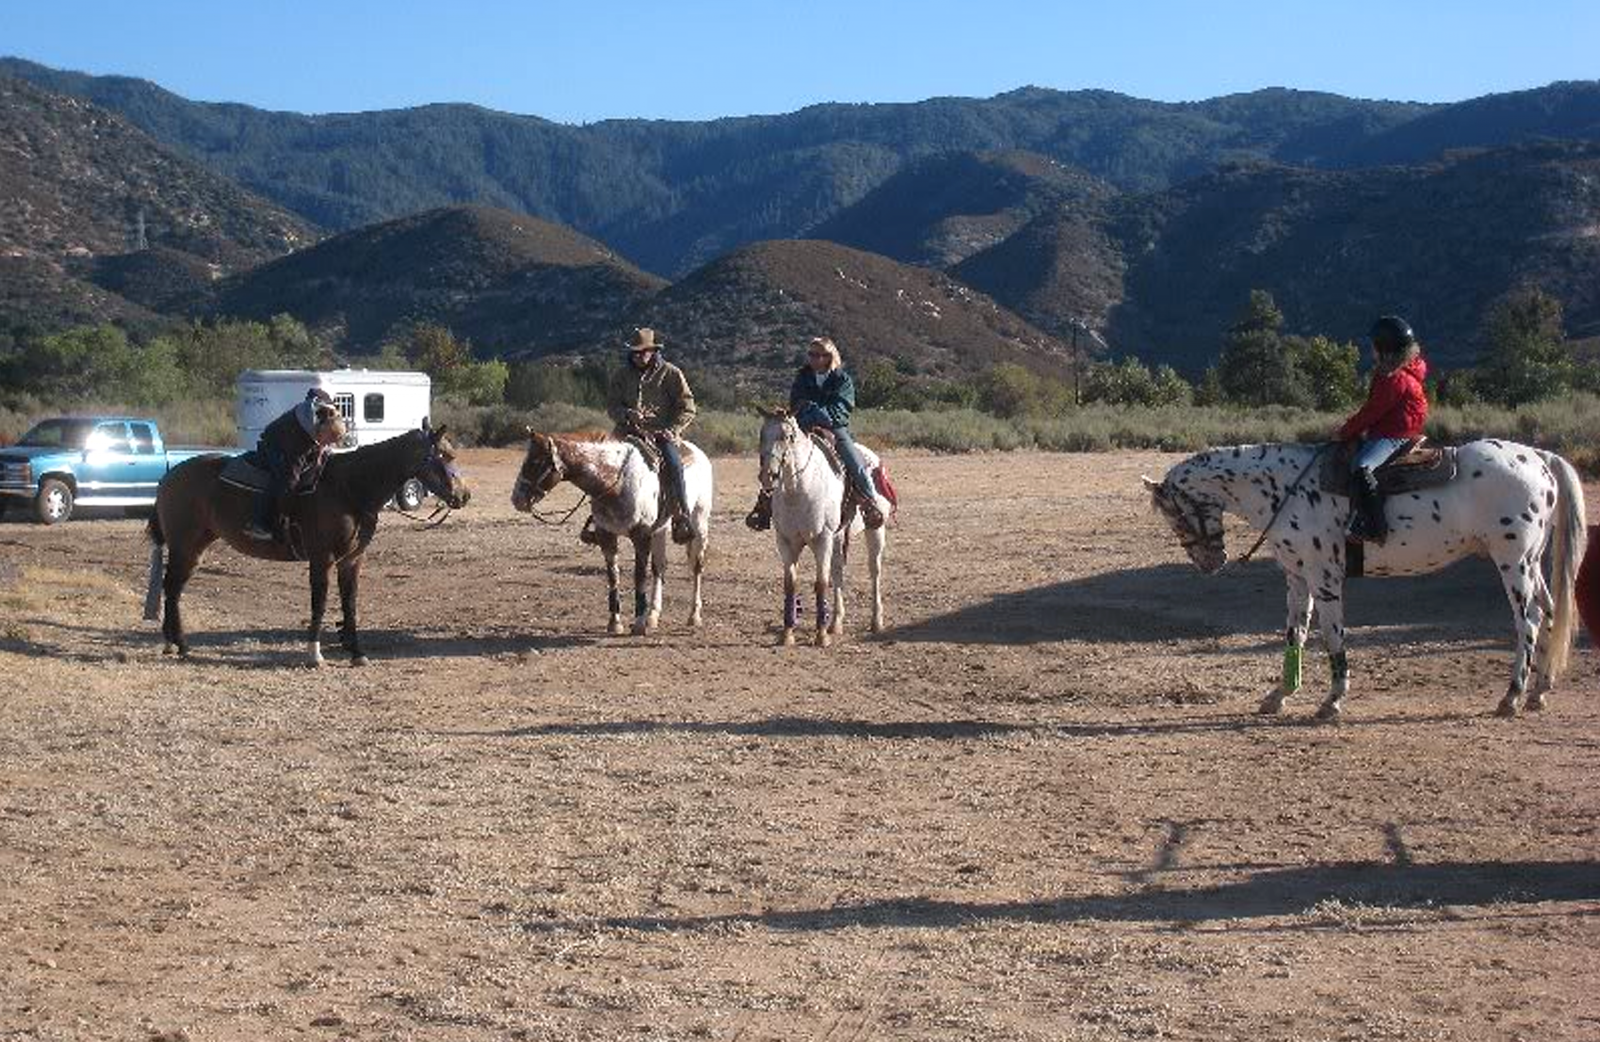 A group of people on horseback in a dirt open area of the park.